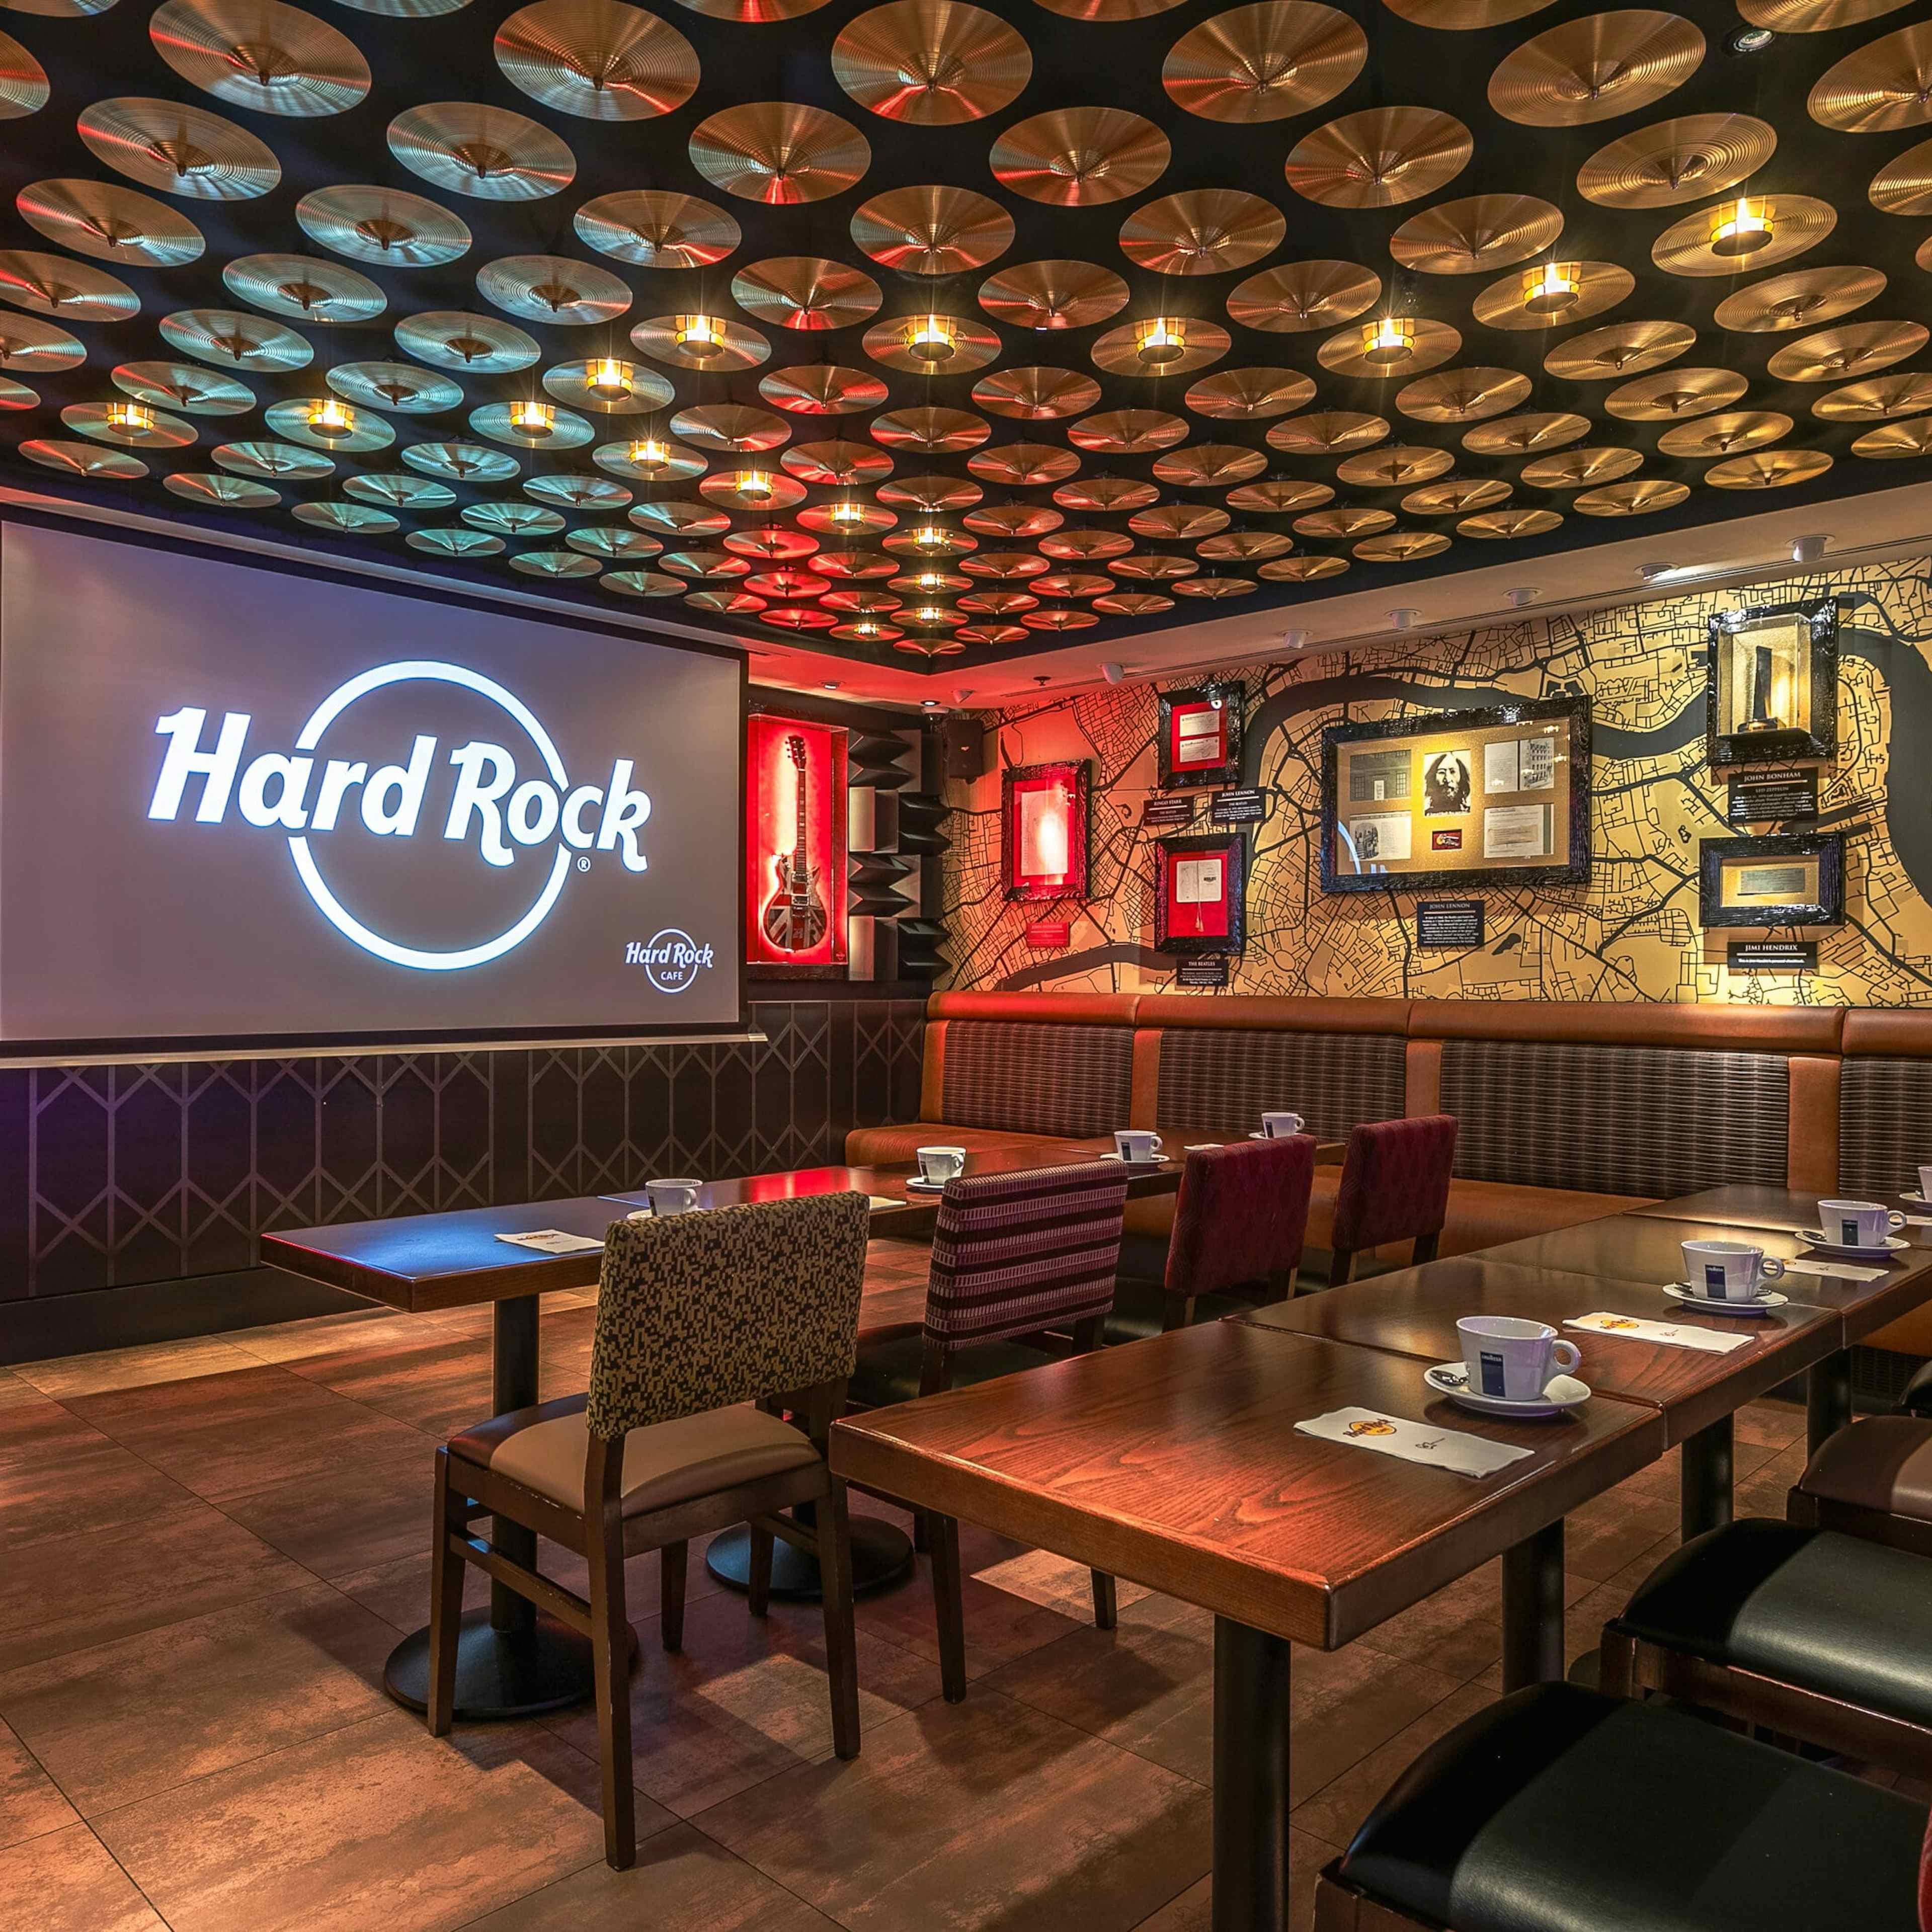 Hard Rock Cafe Piccadilly Circus - Legends Room image 2